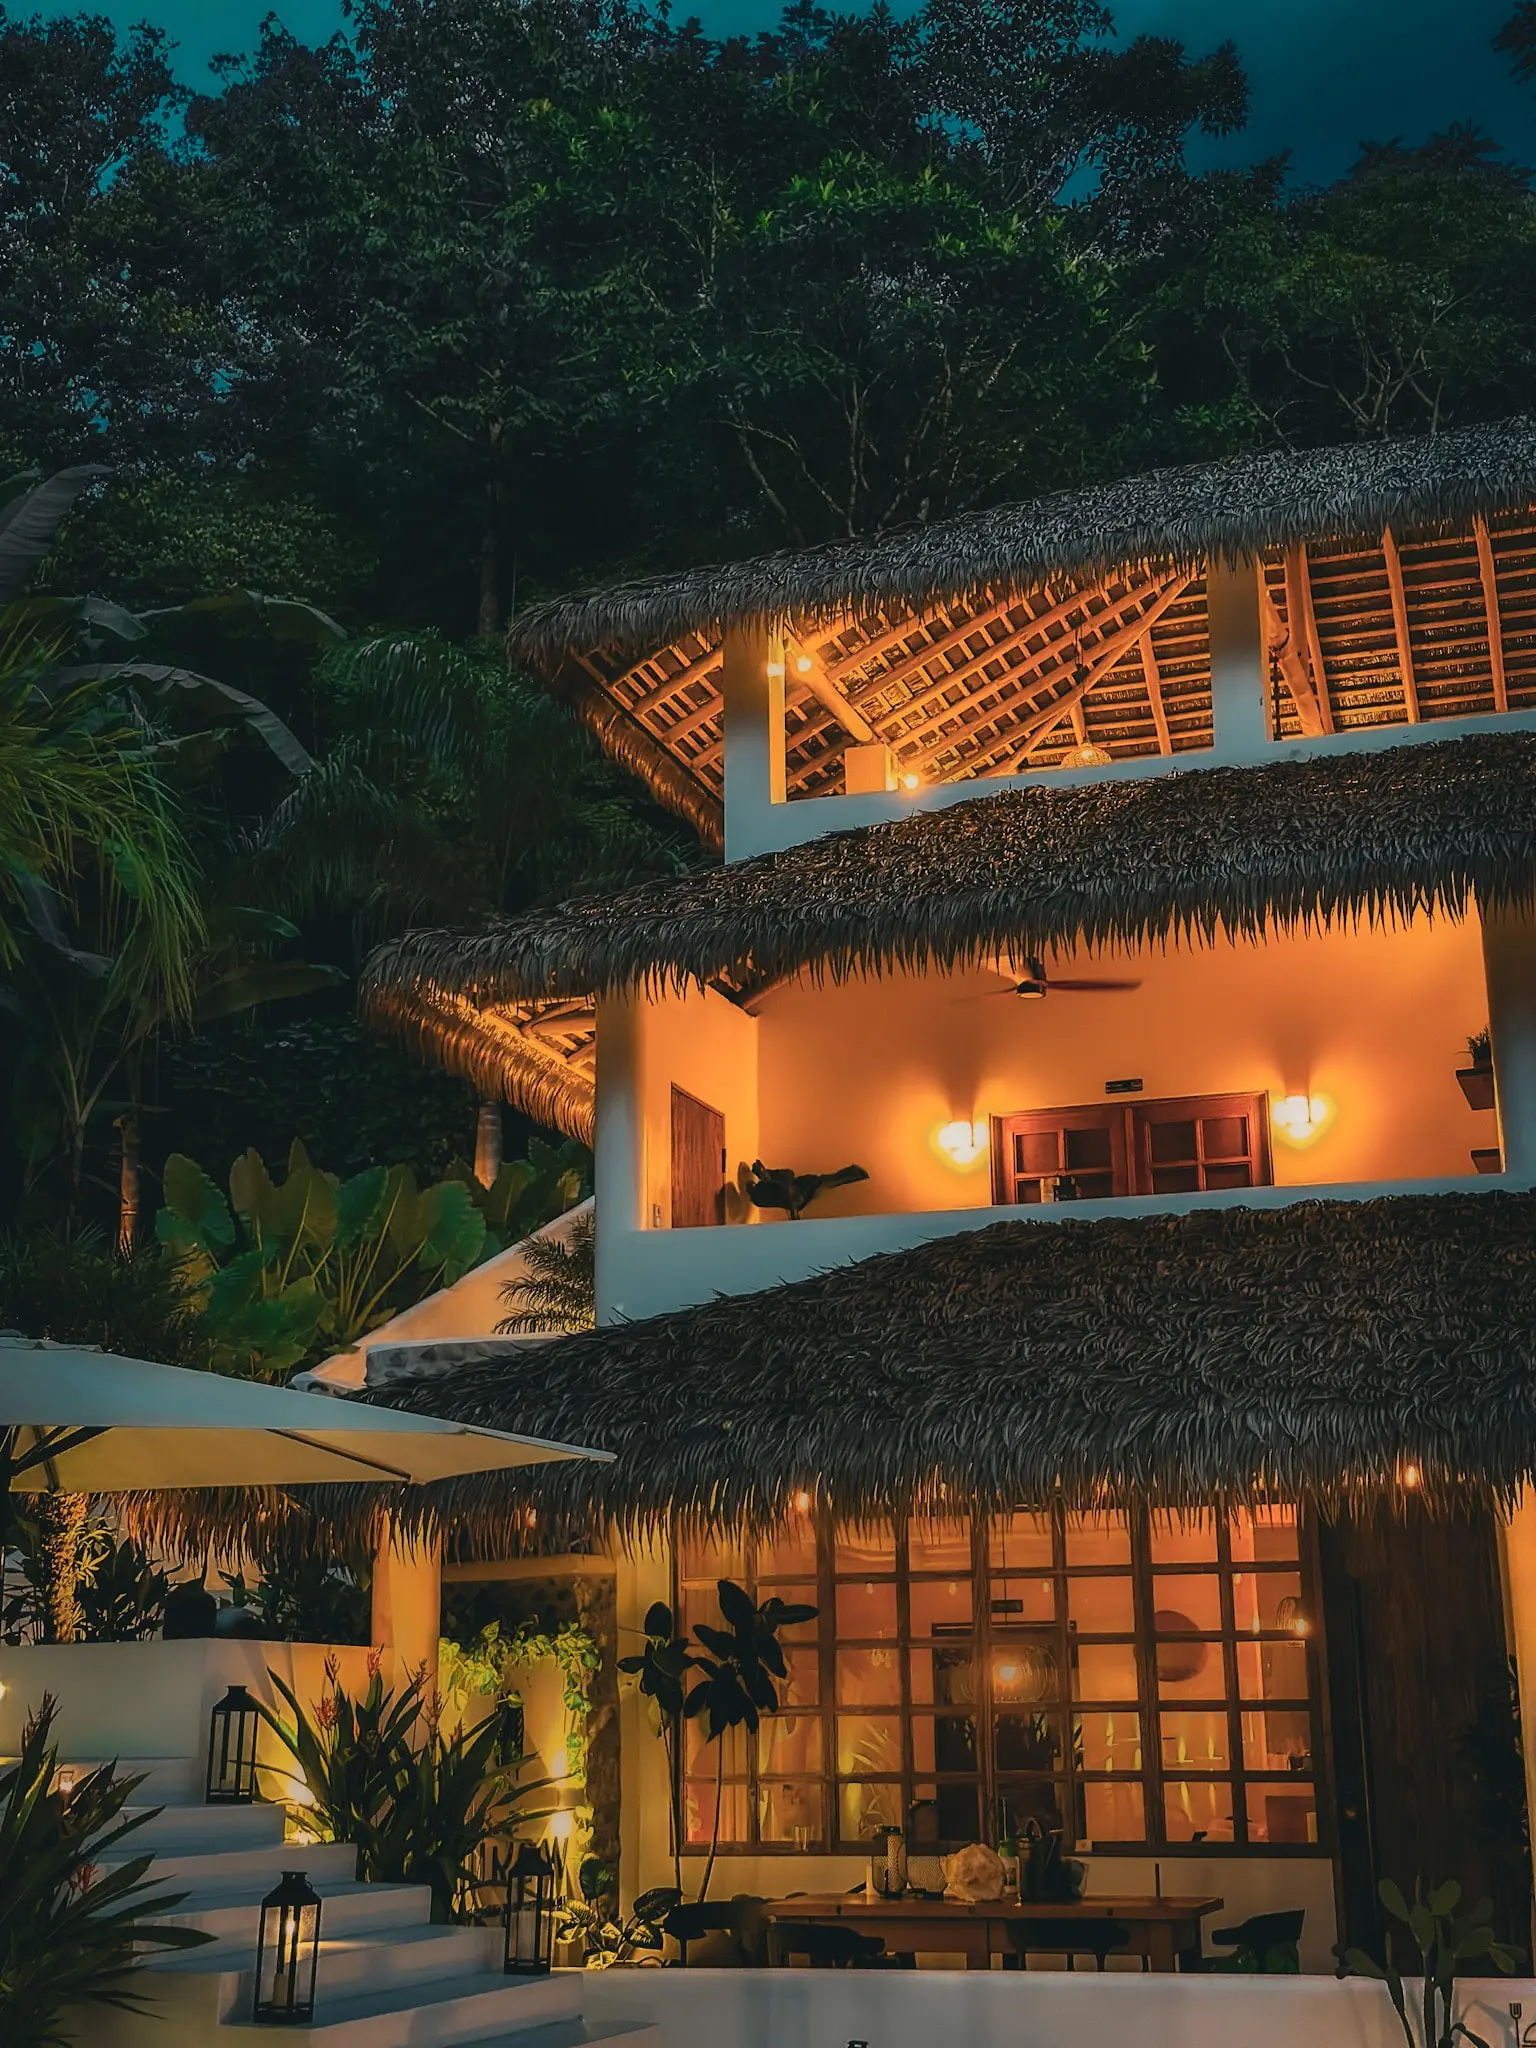 A stunning view of Vayu Retreat Villas at dusk, showcasing the beautifully illuminated thatched-roof structure surrounded by lush jungle greenery. This enchanting image highlights one of the best hotels in Uvita, Costa Rica, perfect for those seeking a serene and luxurious jungle retreat.